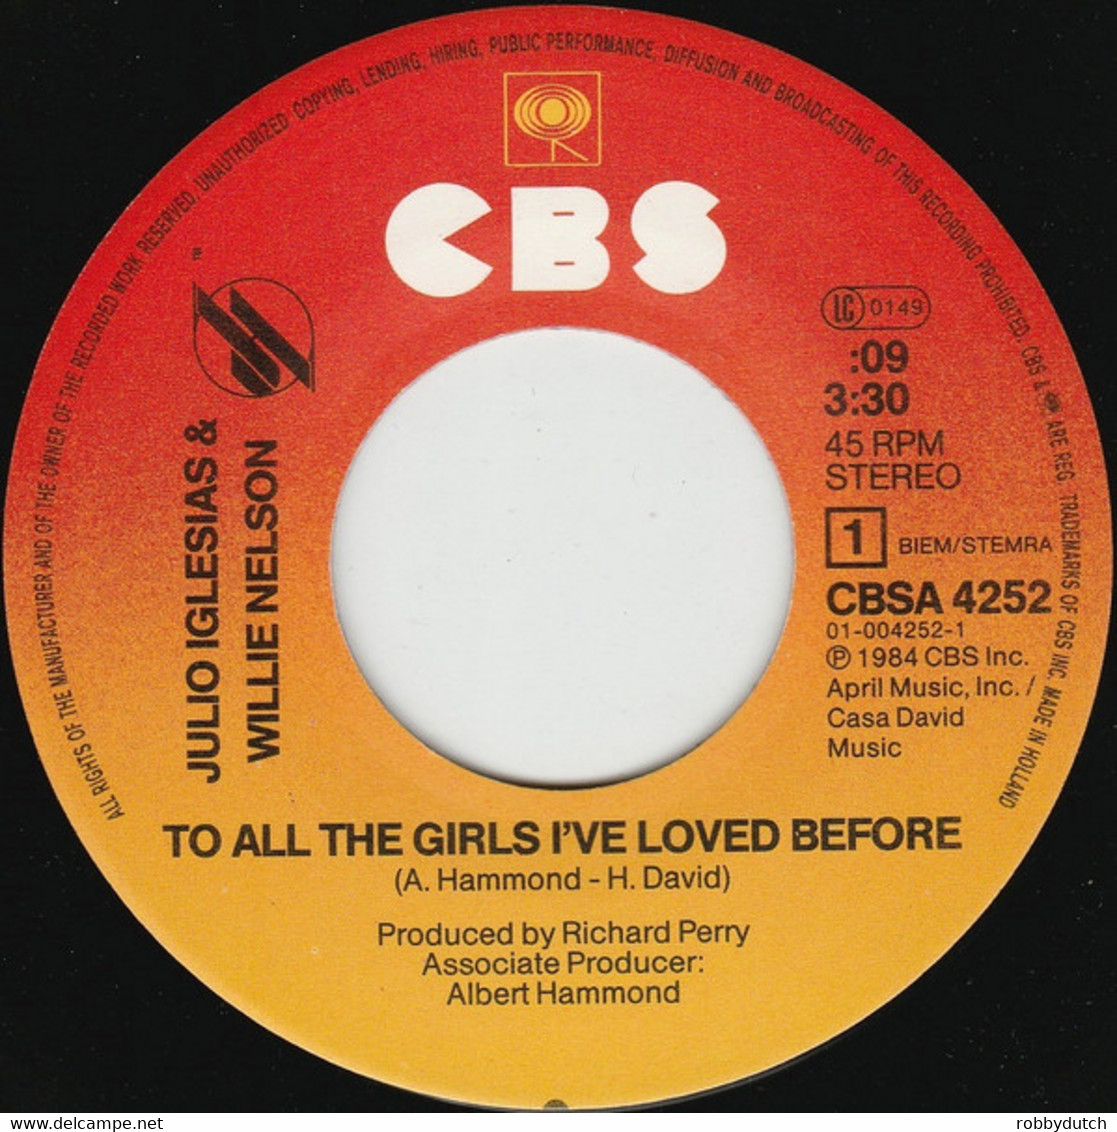 * 7" * JULIO IGLESIAS & WILLIE NELSON - TO ALL THE GIRLS I'VE LOVED BEFORE (1984 EX) - Country Y Folk